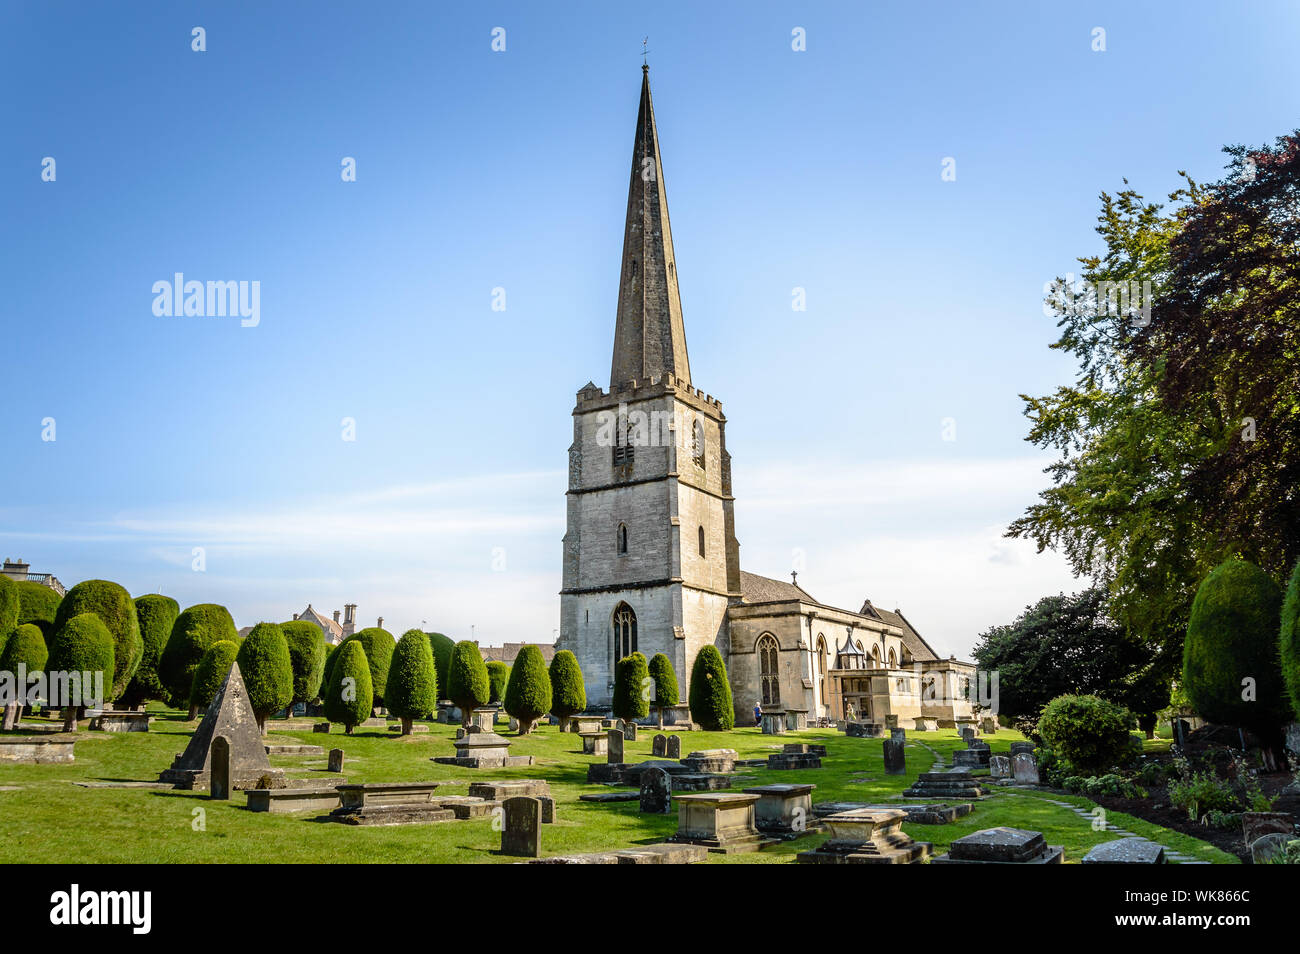 Low Angle View Of St Mary Church With Cemetery In Foreground At Painswick Stock Photo